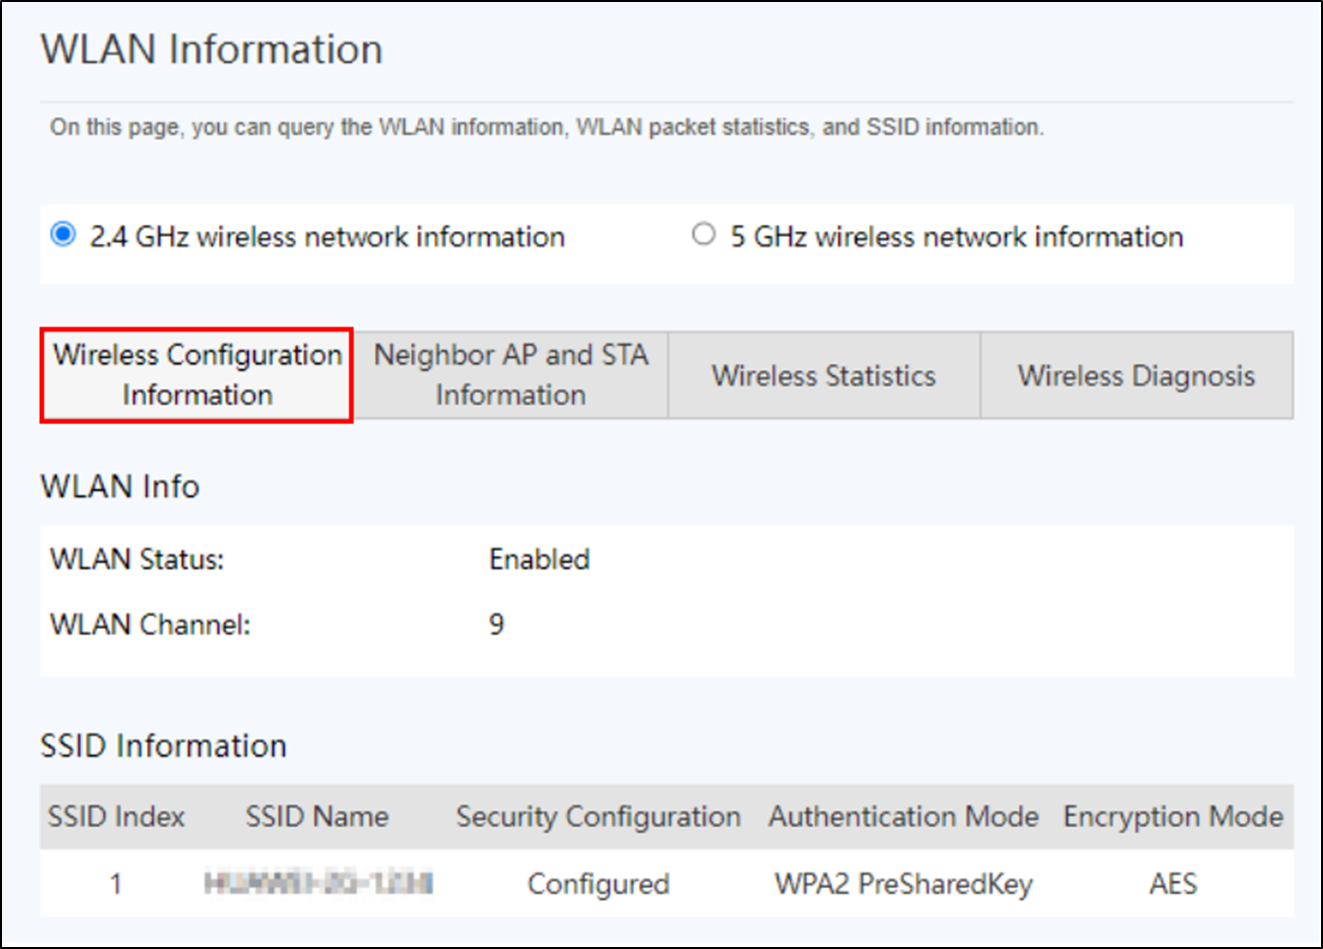 ONT Wireless Configuration Information